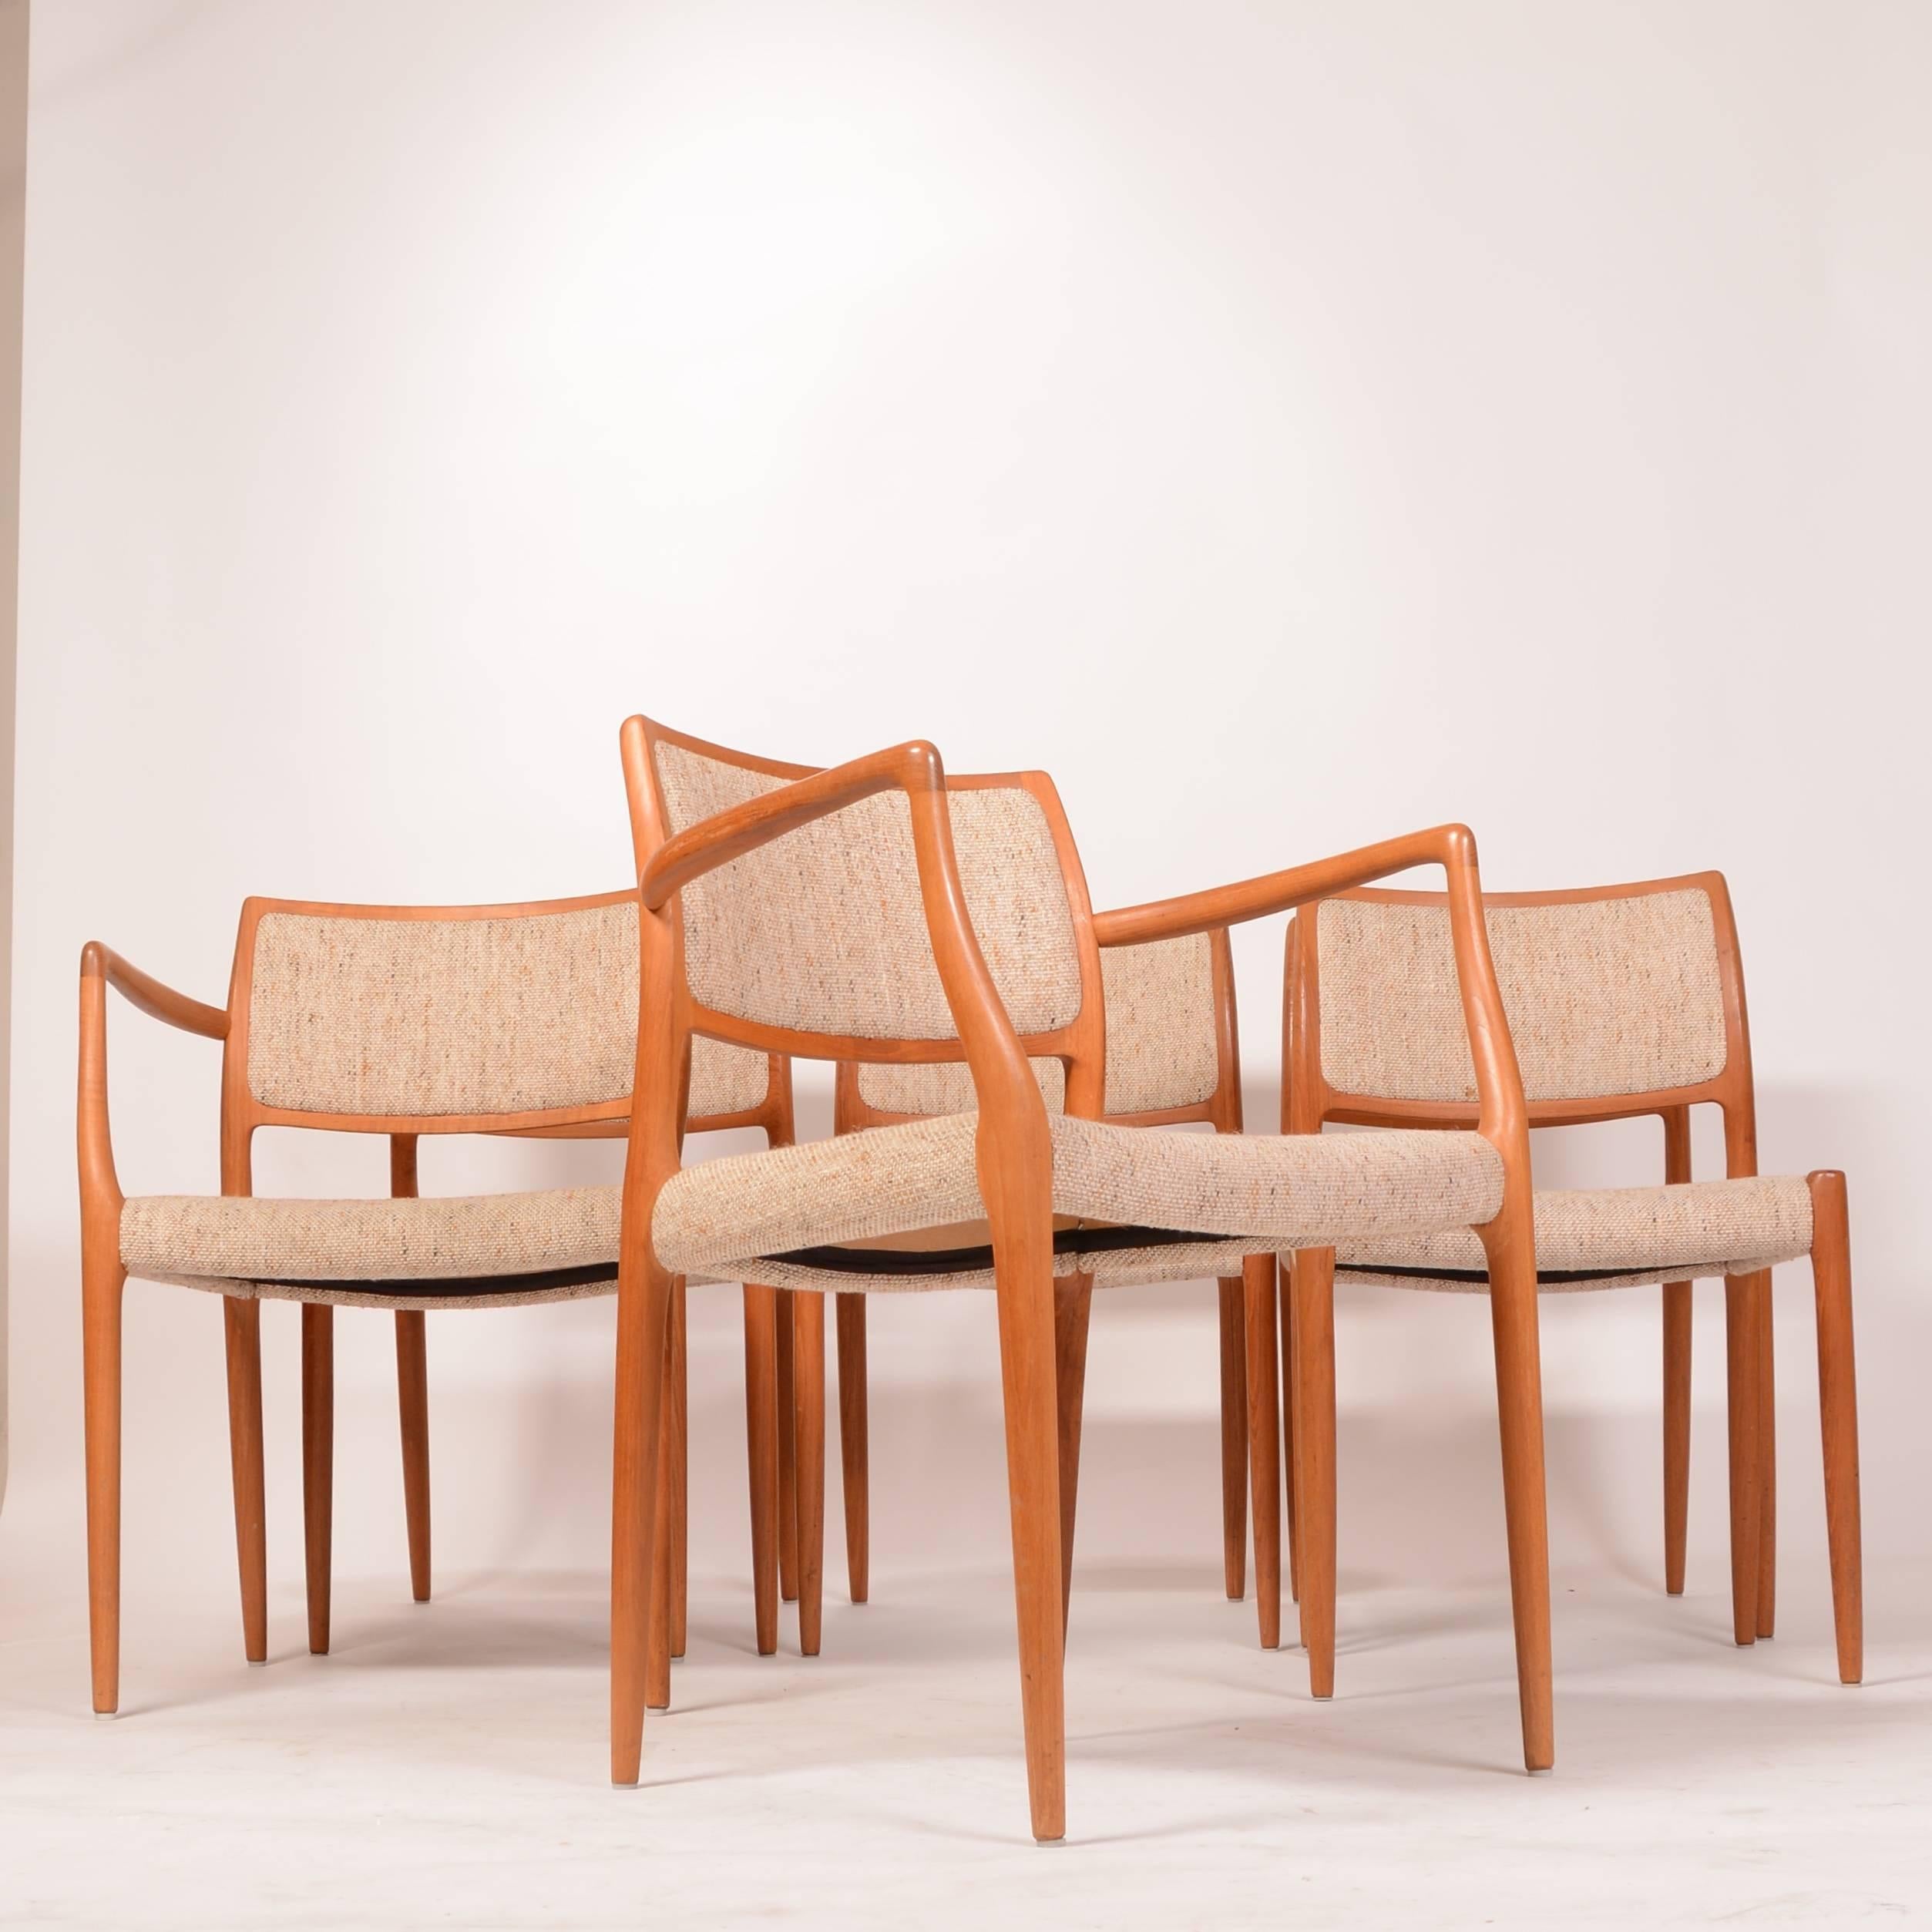 This is a set of 6 teak dining chairs designed by Niels Otto Møller for J. L. Møllers Møbelfabrik. The model 80 dates to 1968 and is an exceptional chair offering a very comfortable posture and the warm modern look typical of great danish design. 